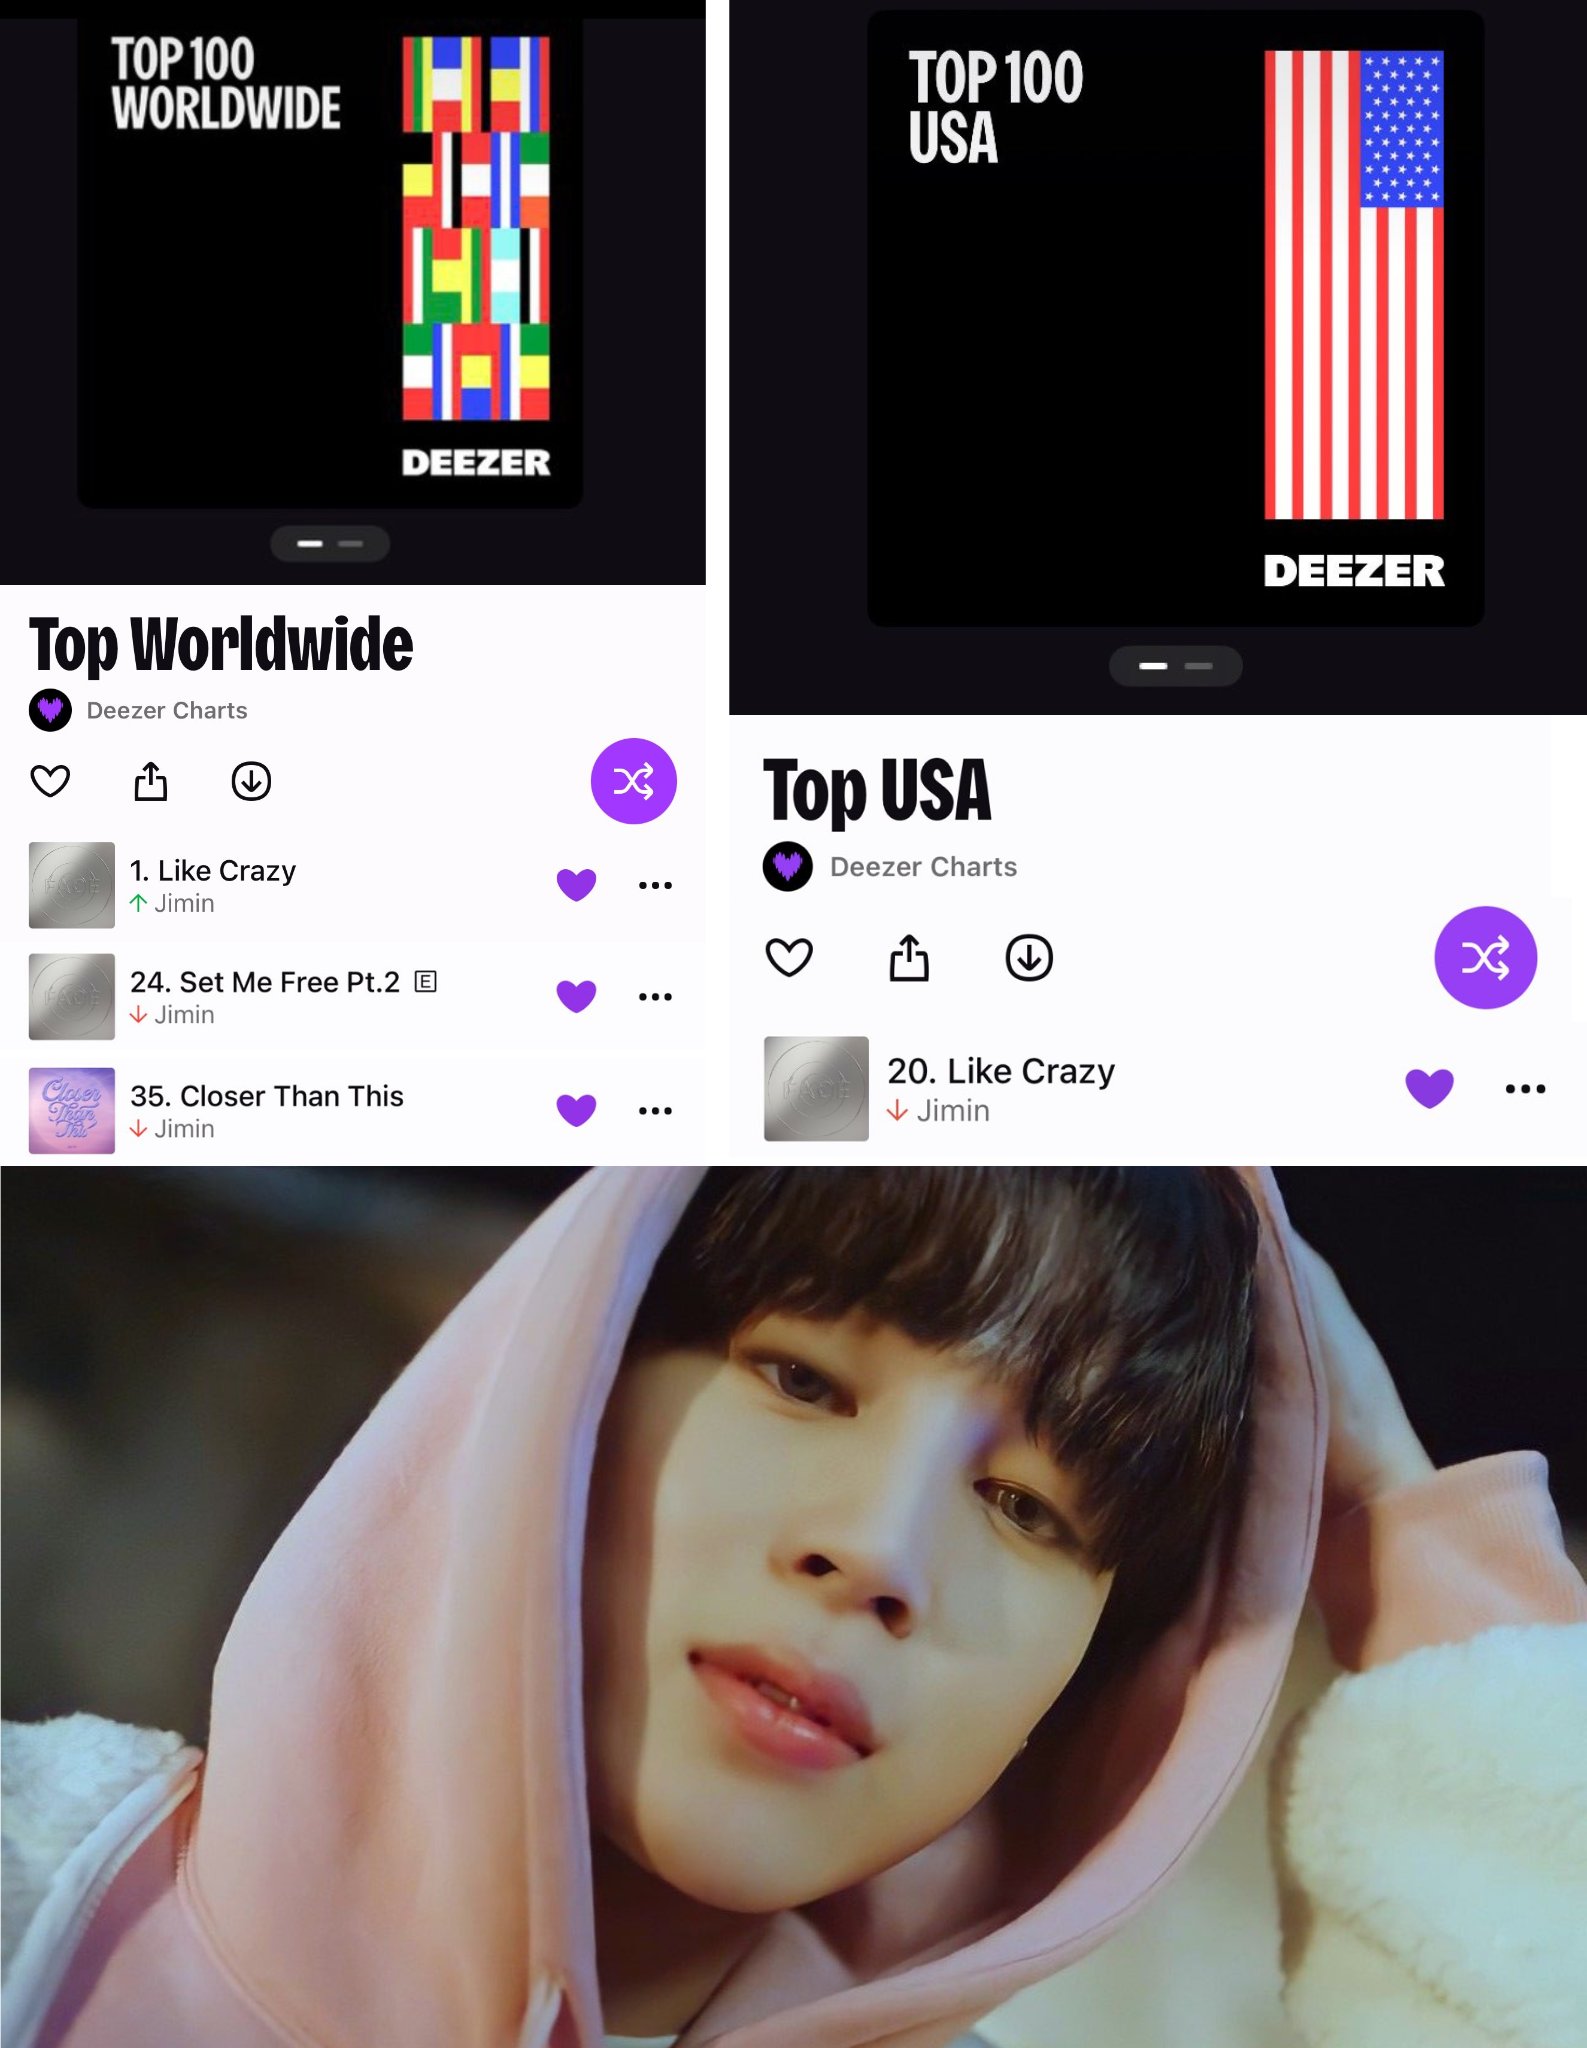 JIMIN DATA  very slow on X: Three of Jimin's songs remain on the